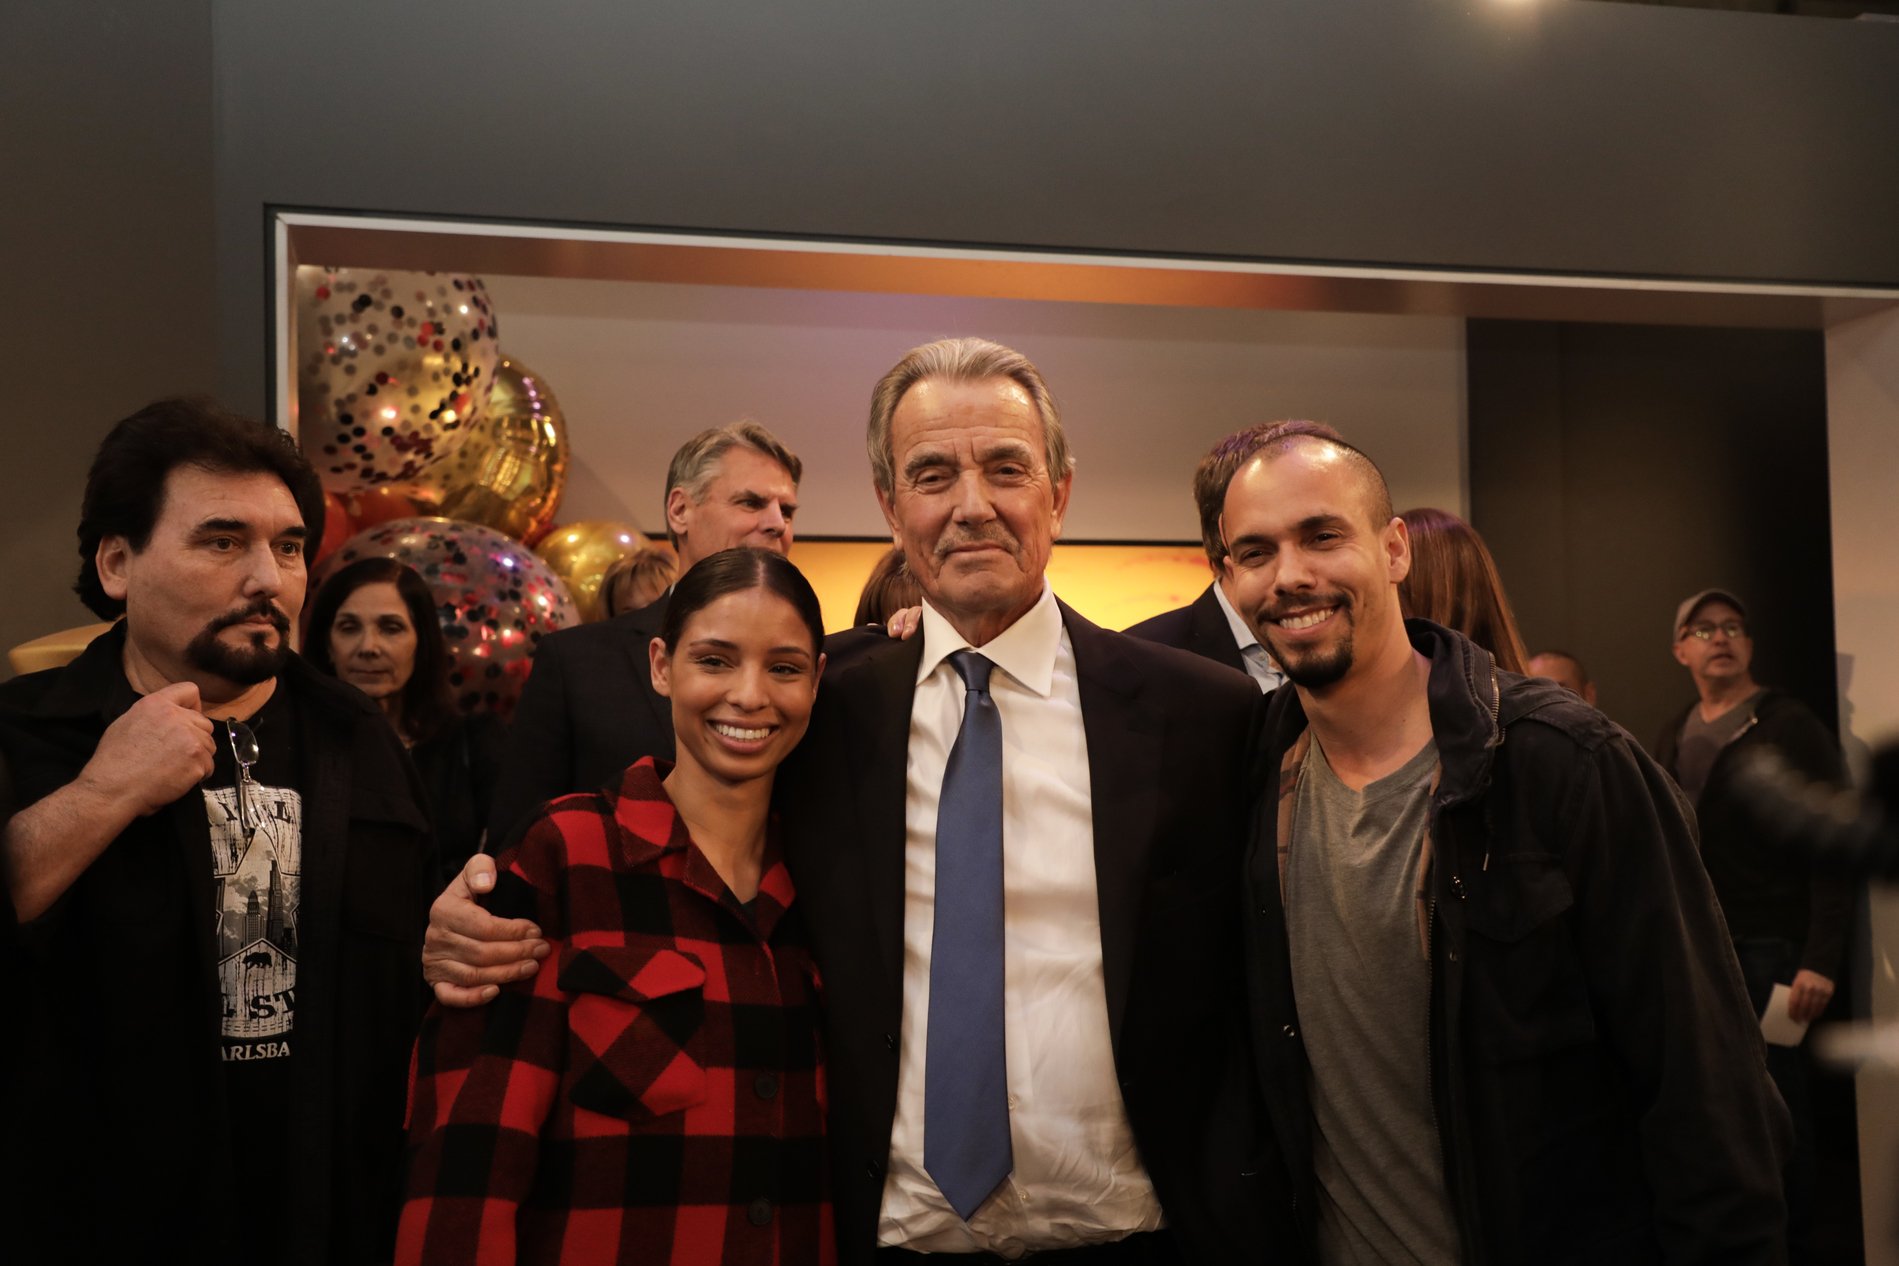 'The Young and the Restless' stars Eric Braeden, Brytni Sarpy, and Bryton James 07, 2020